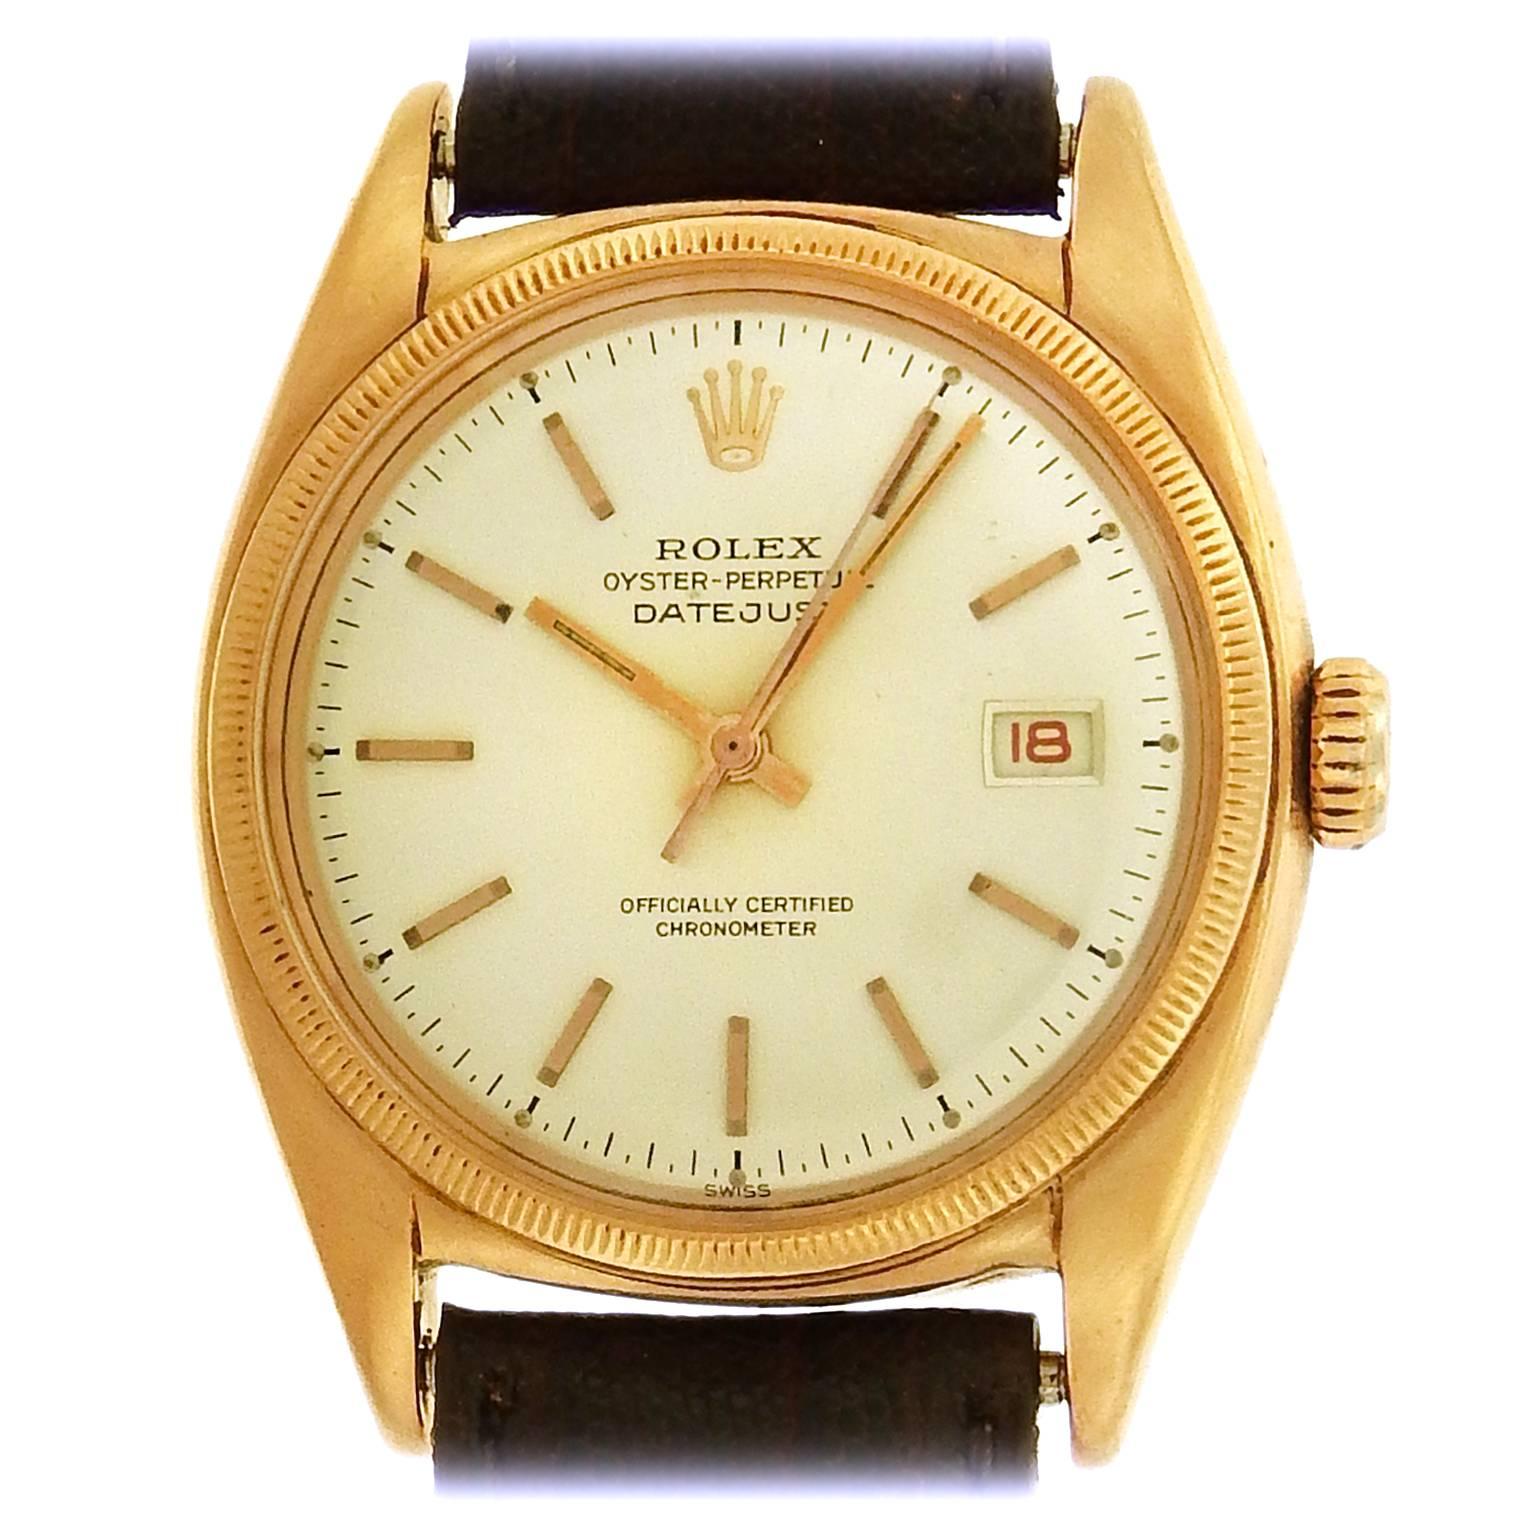 18K rose gold rare Rolex 'Ovettone' Ref. 6031 Datejust, circa 1950's, is a tonneau-shape 35mm automatic bubbleback nicknamed for its 'big egg' shape due to the back.  The silvered dial features applied rose gold baton hour indexes, luminous baton